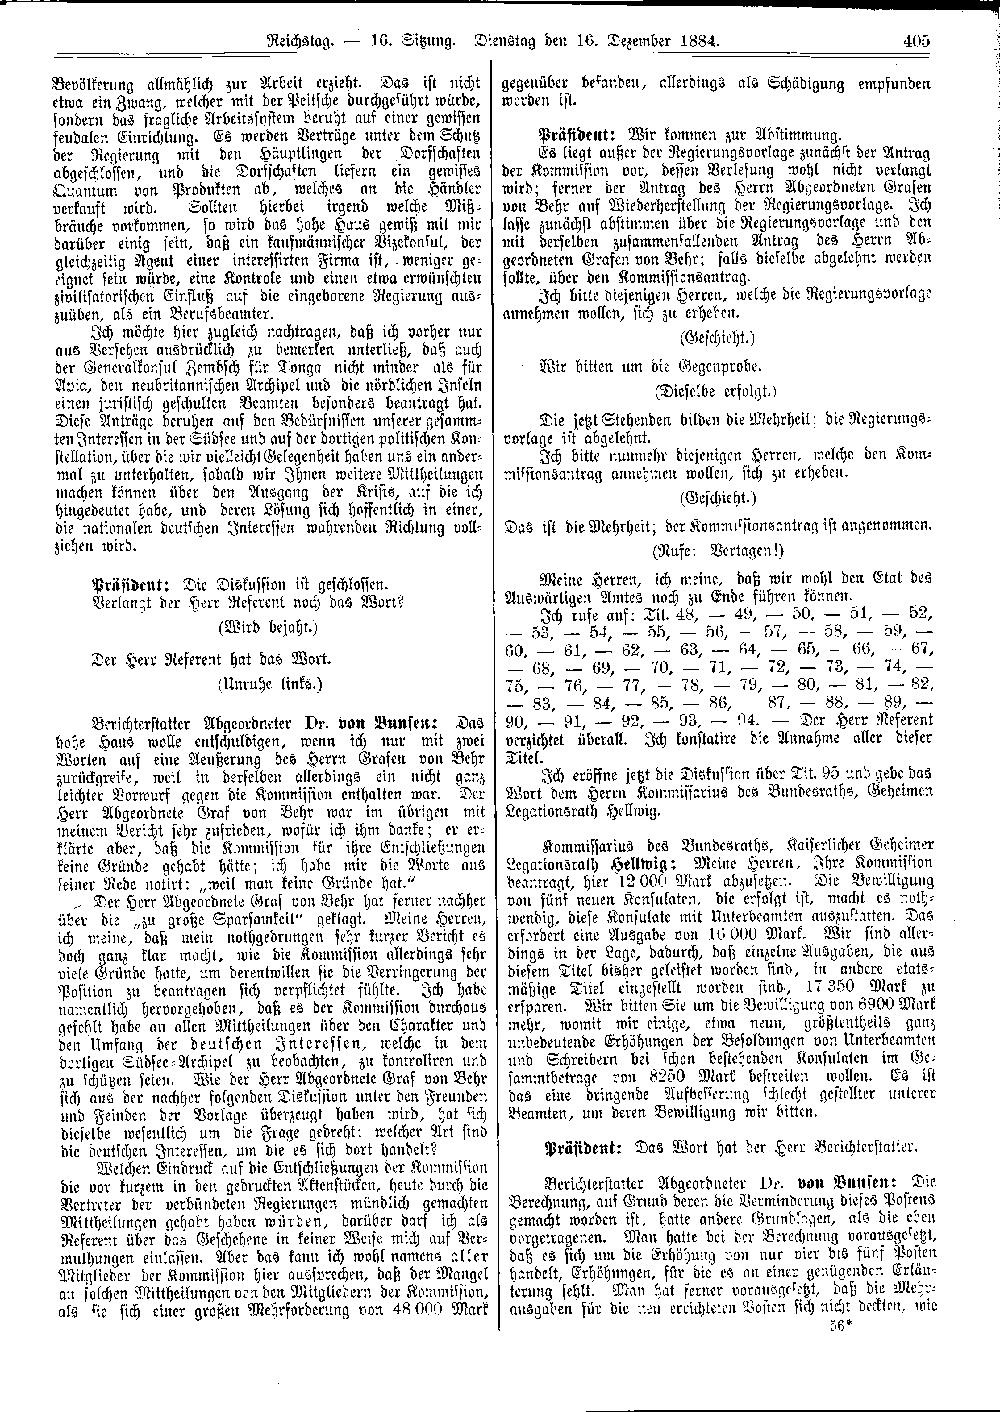 Scan of page 405